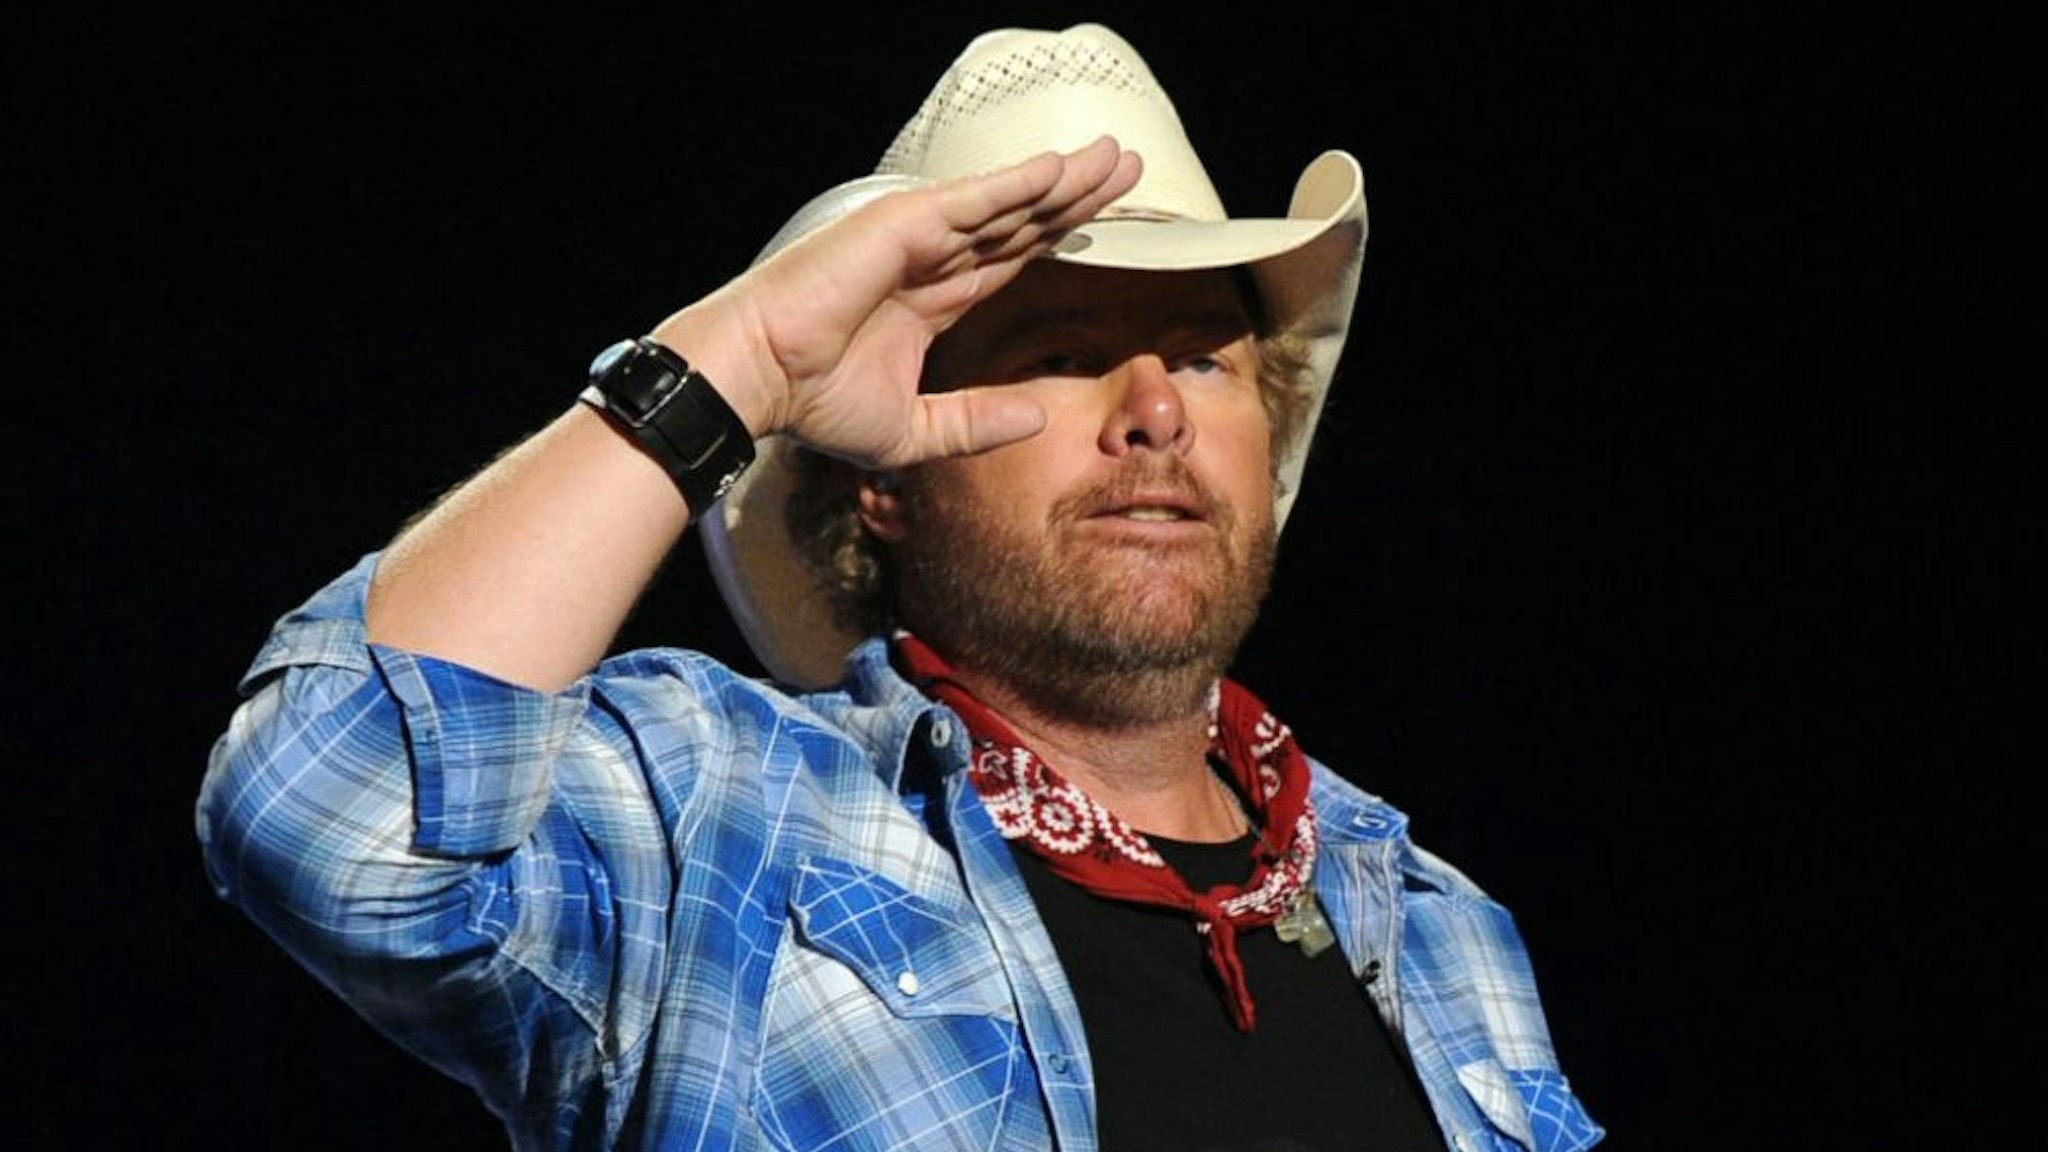 LAS VEGAS, NV - APRIL 07: Musician Toby Keith performs onstage during ACM Presents: An All-Star Salute To The Troops at the MGM Grand Garden Arena on April 7, 2014 in Las Vegas, Nevada.